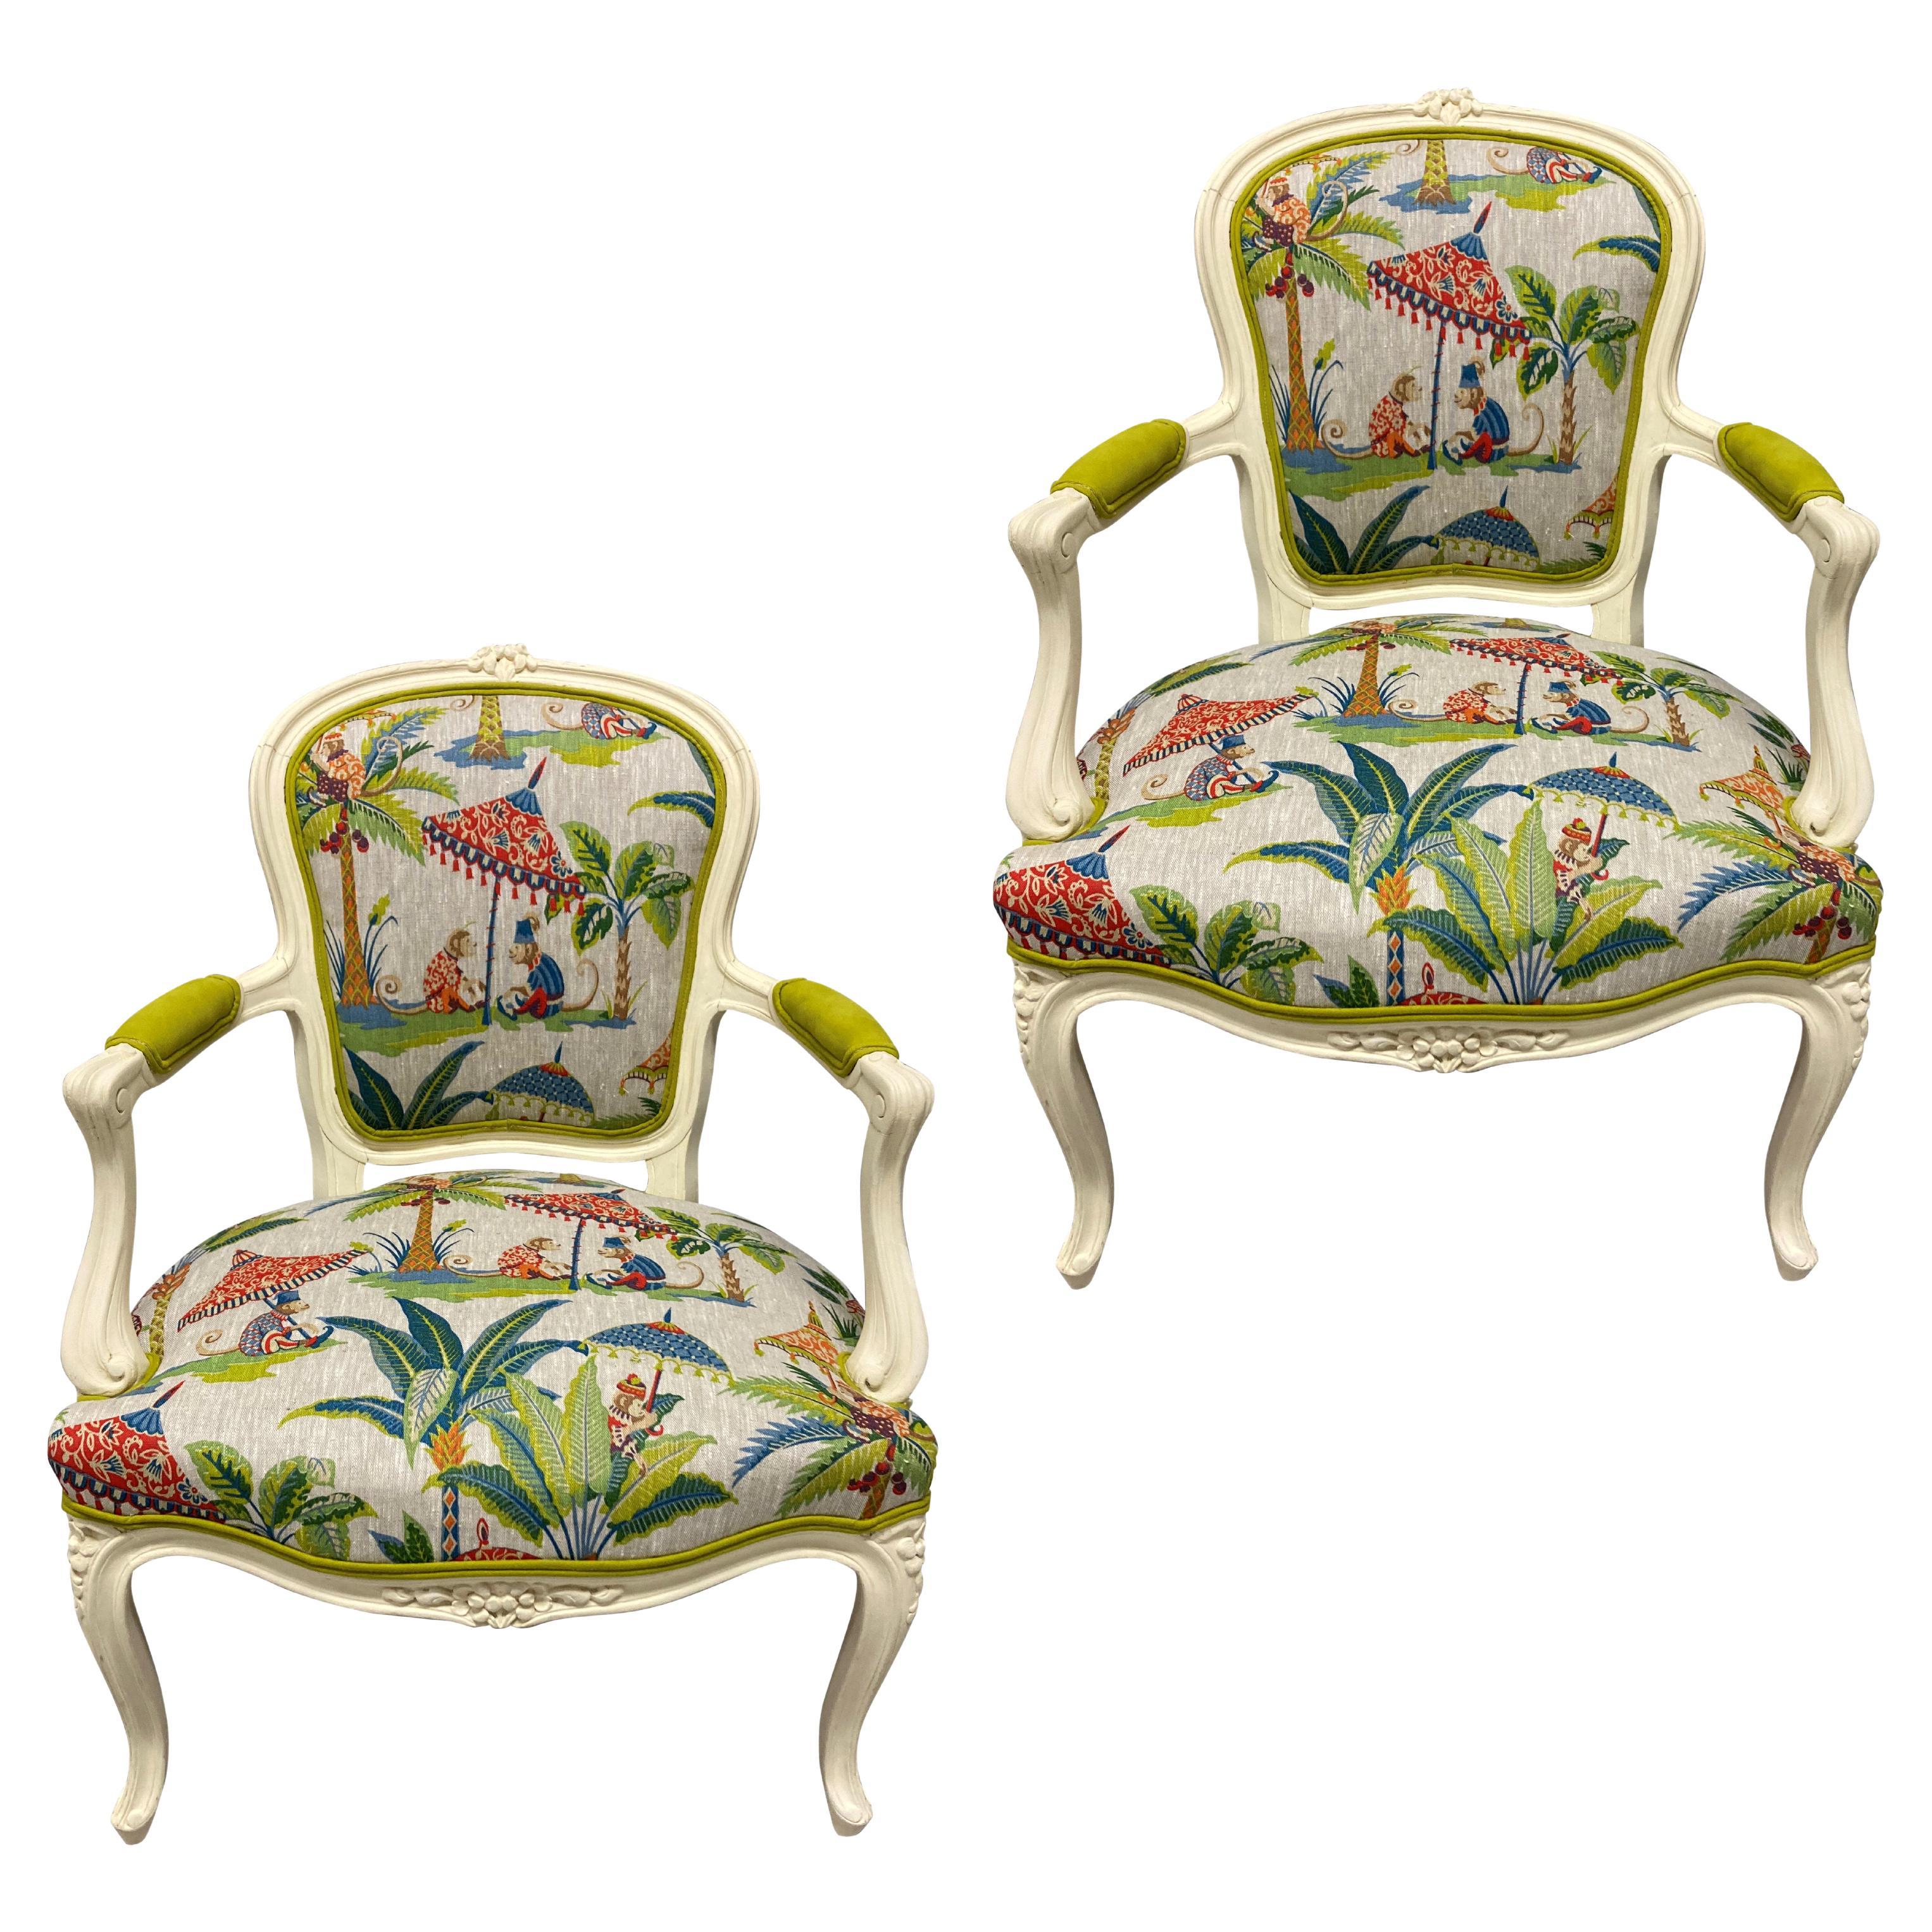 Pair of Louis XV Style Painted Armchairs